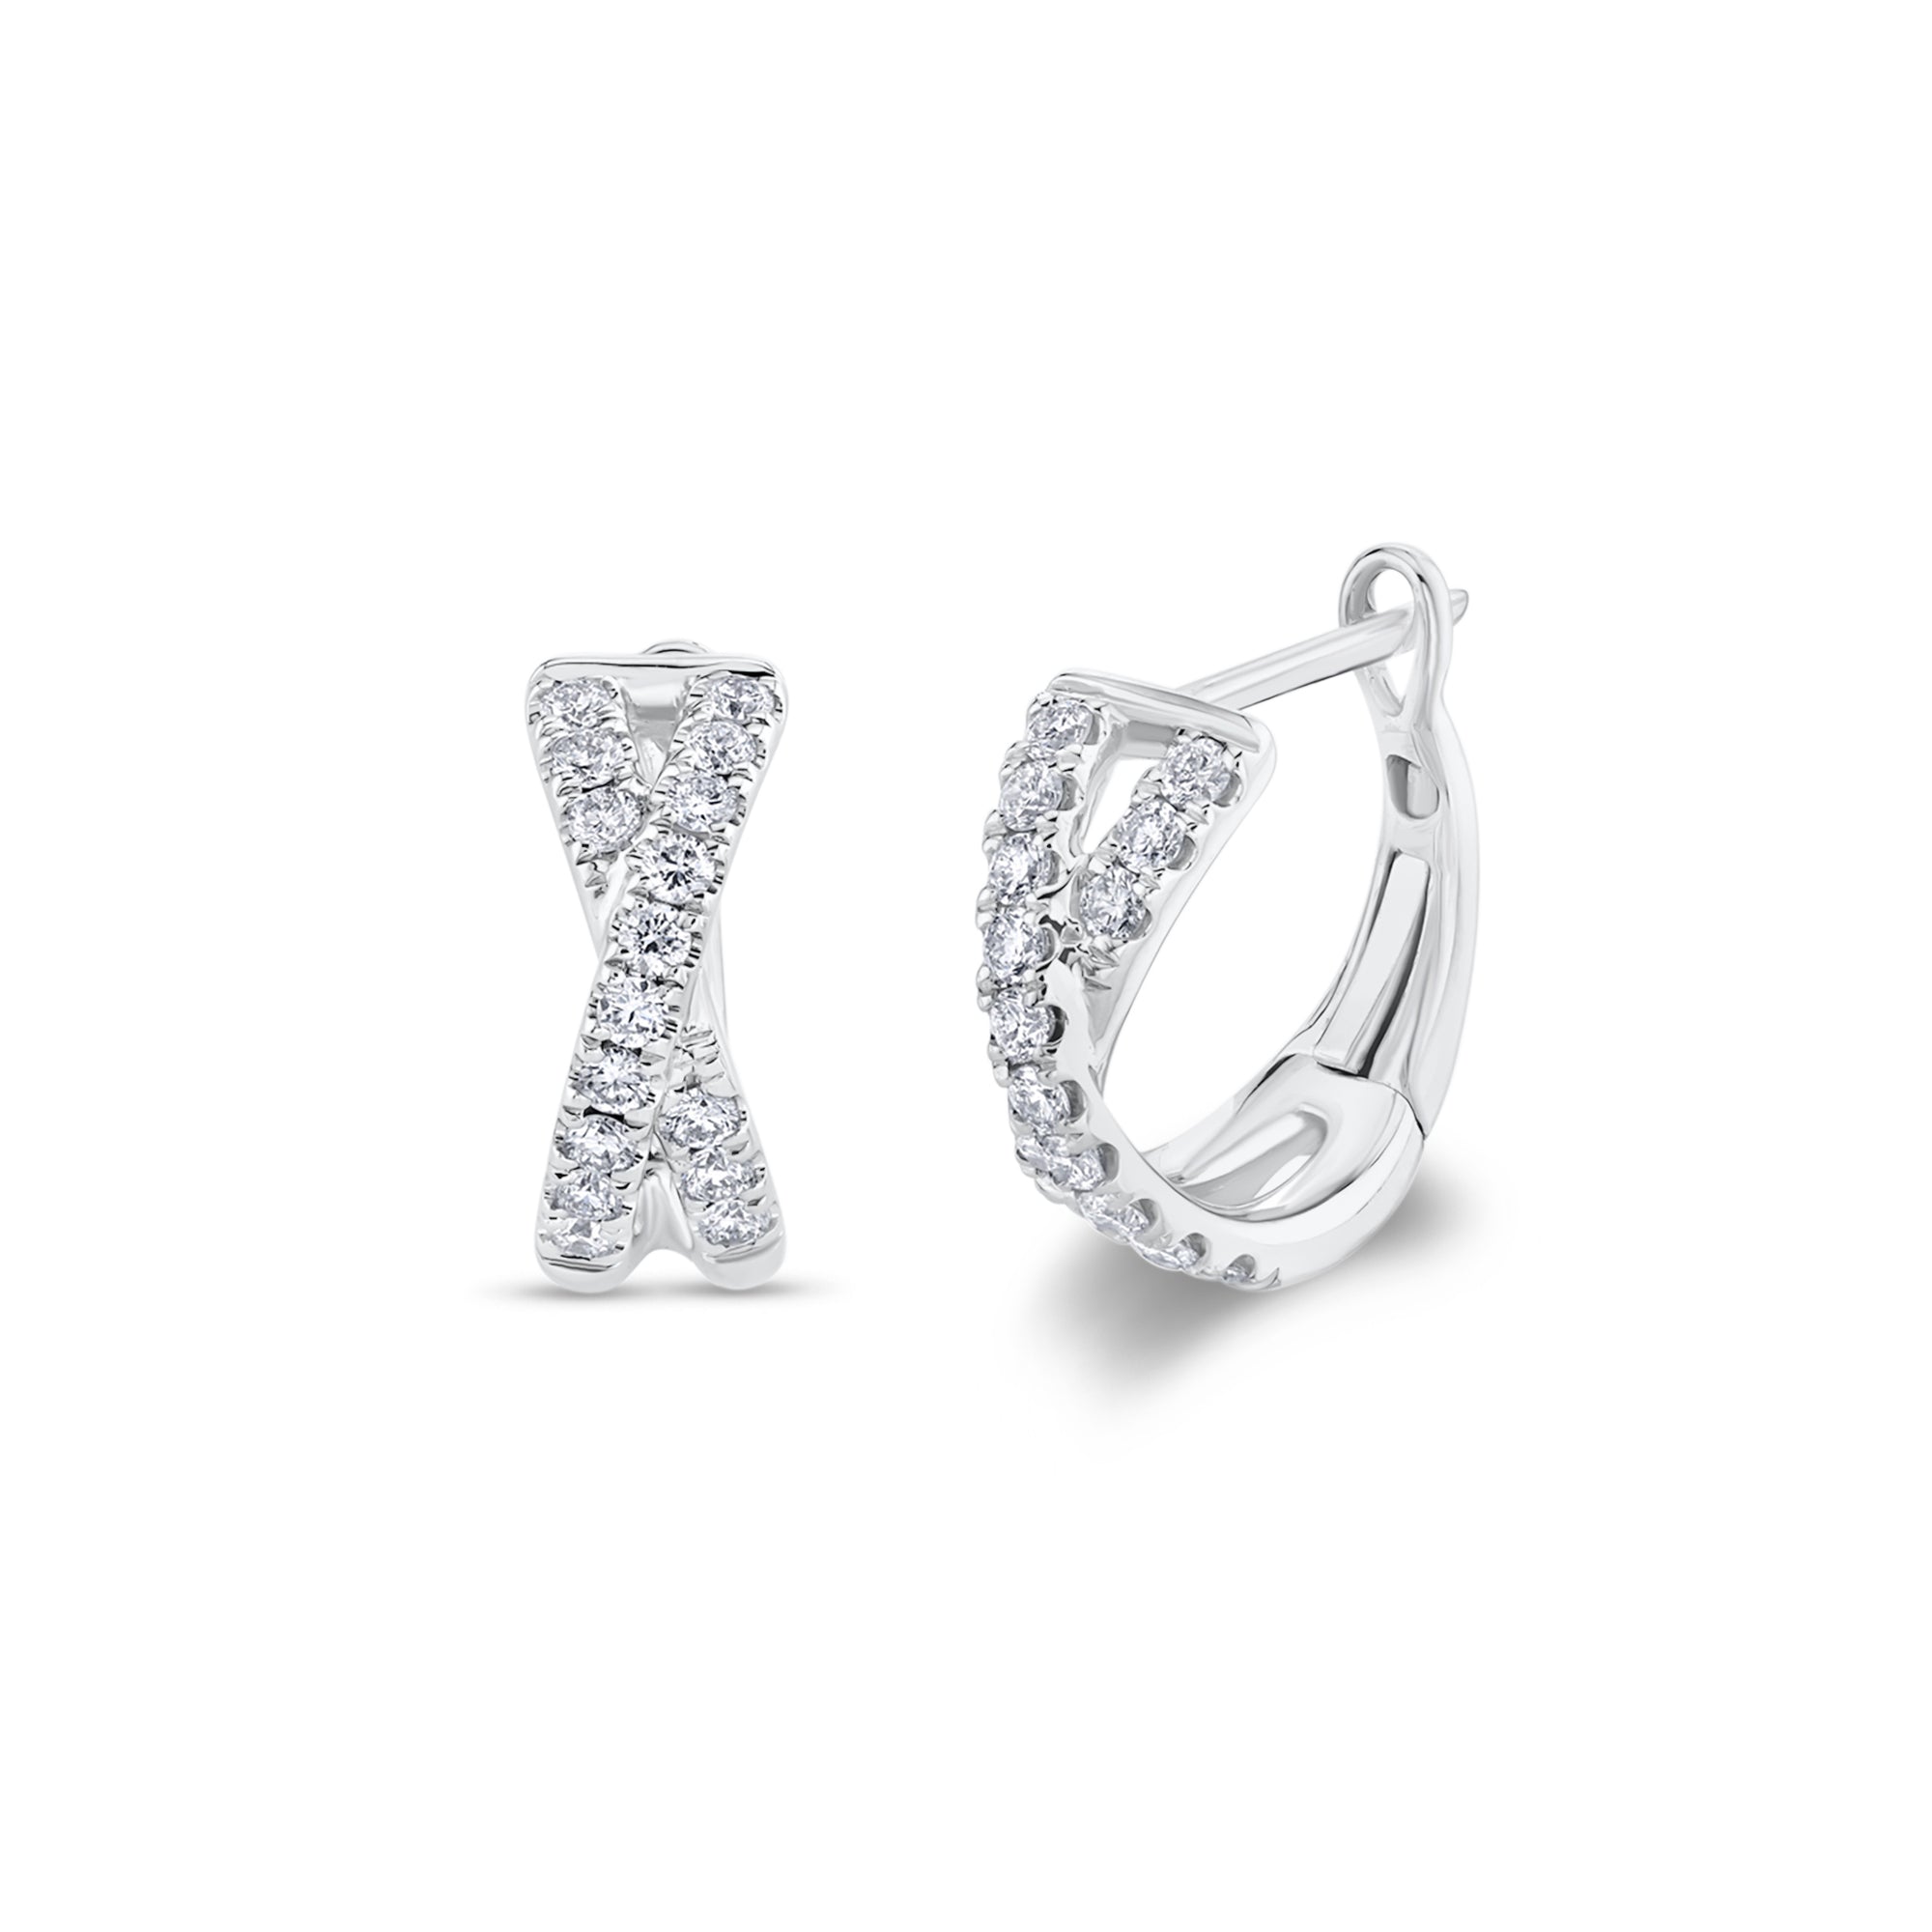 Diamond crossover huggie earrings - 14K gold  - 32 round diamonds totaling 0.40 carats